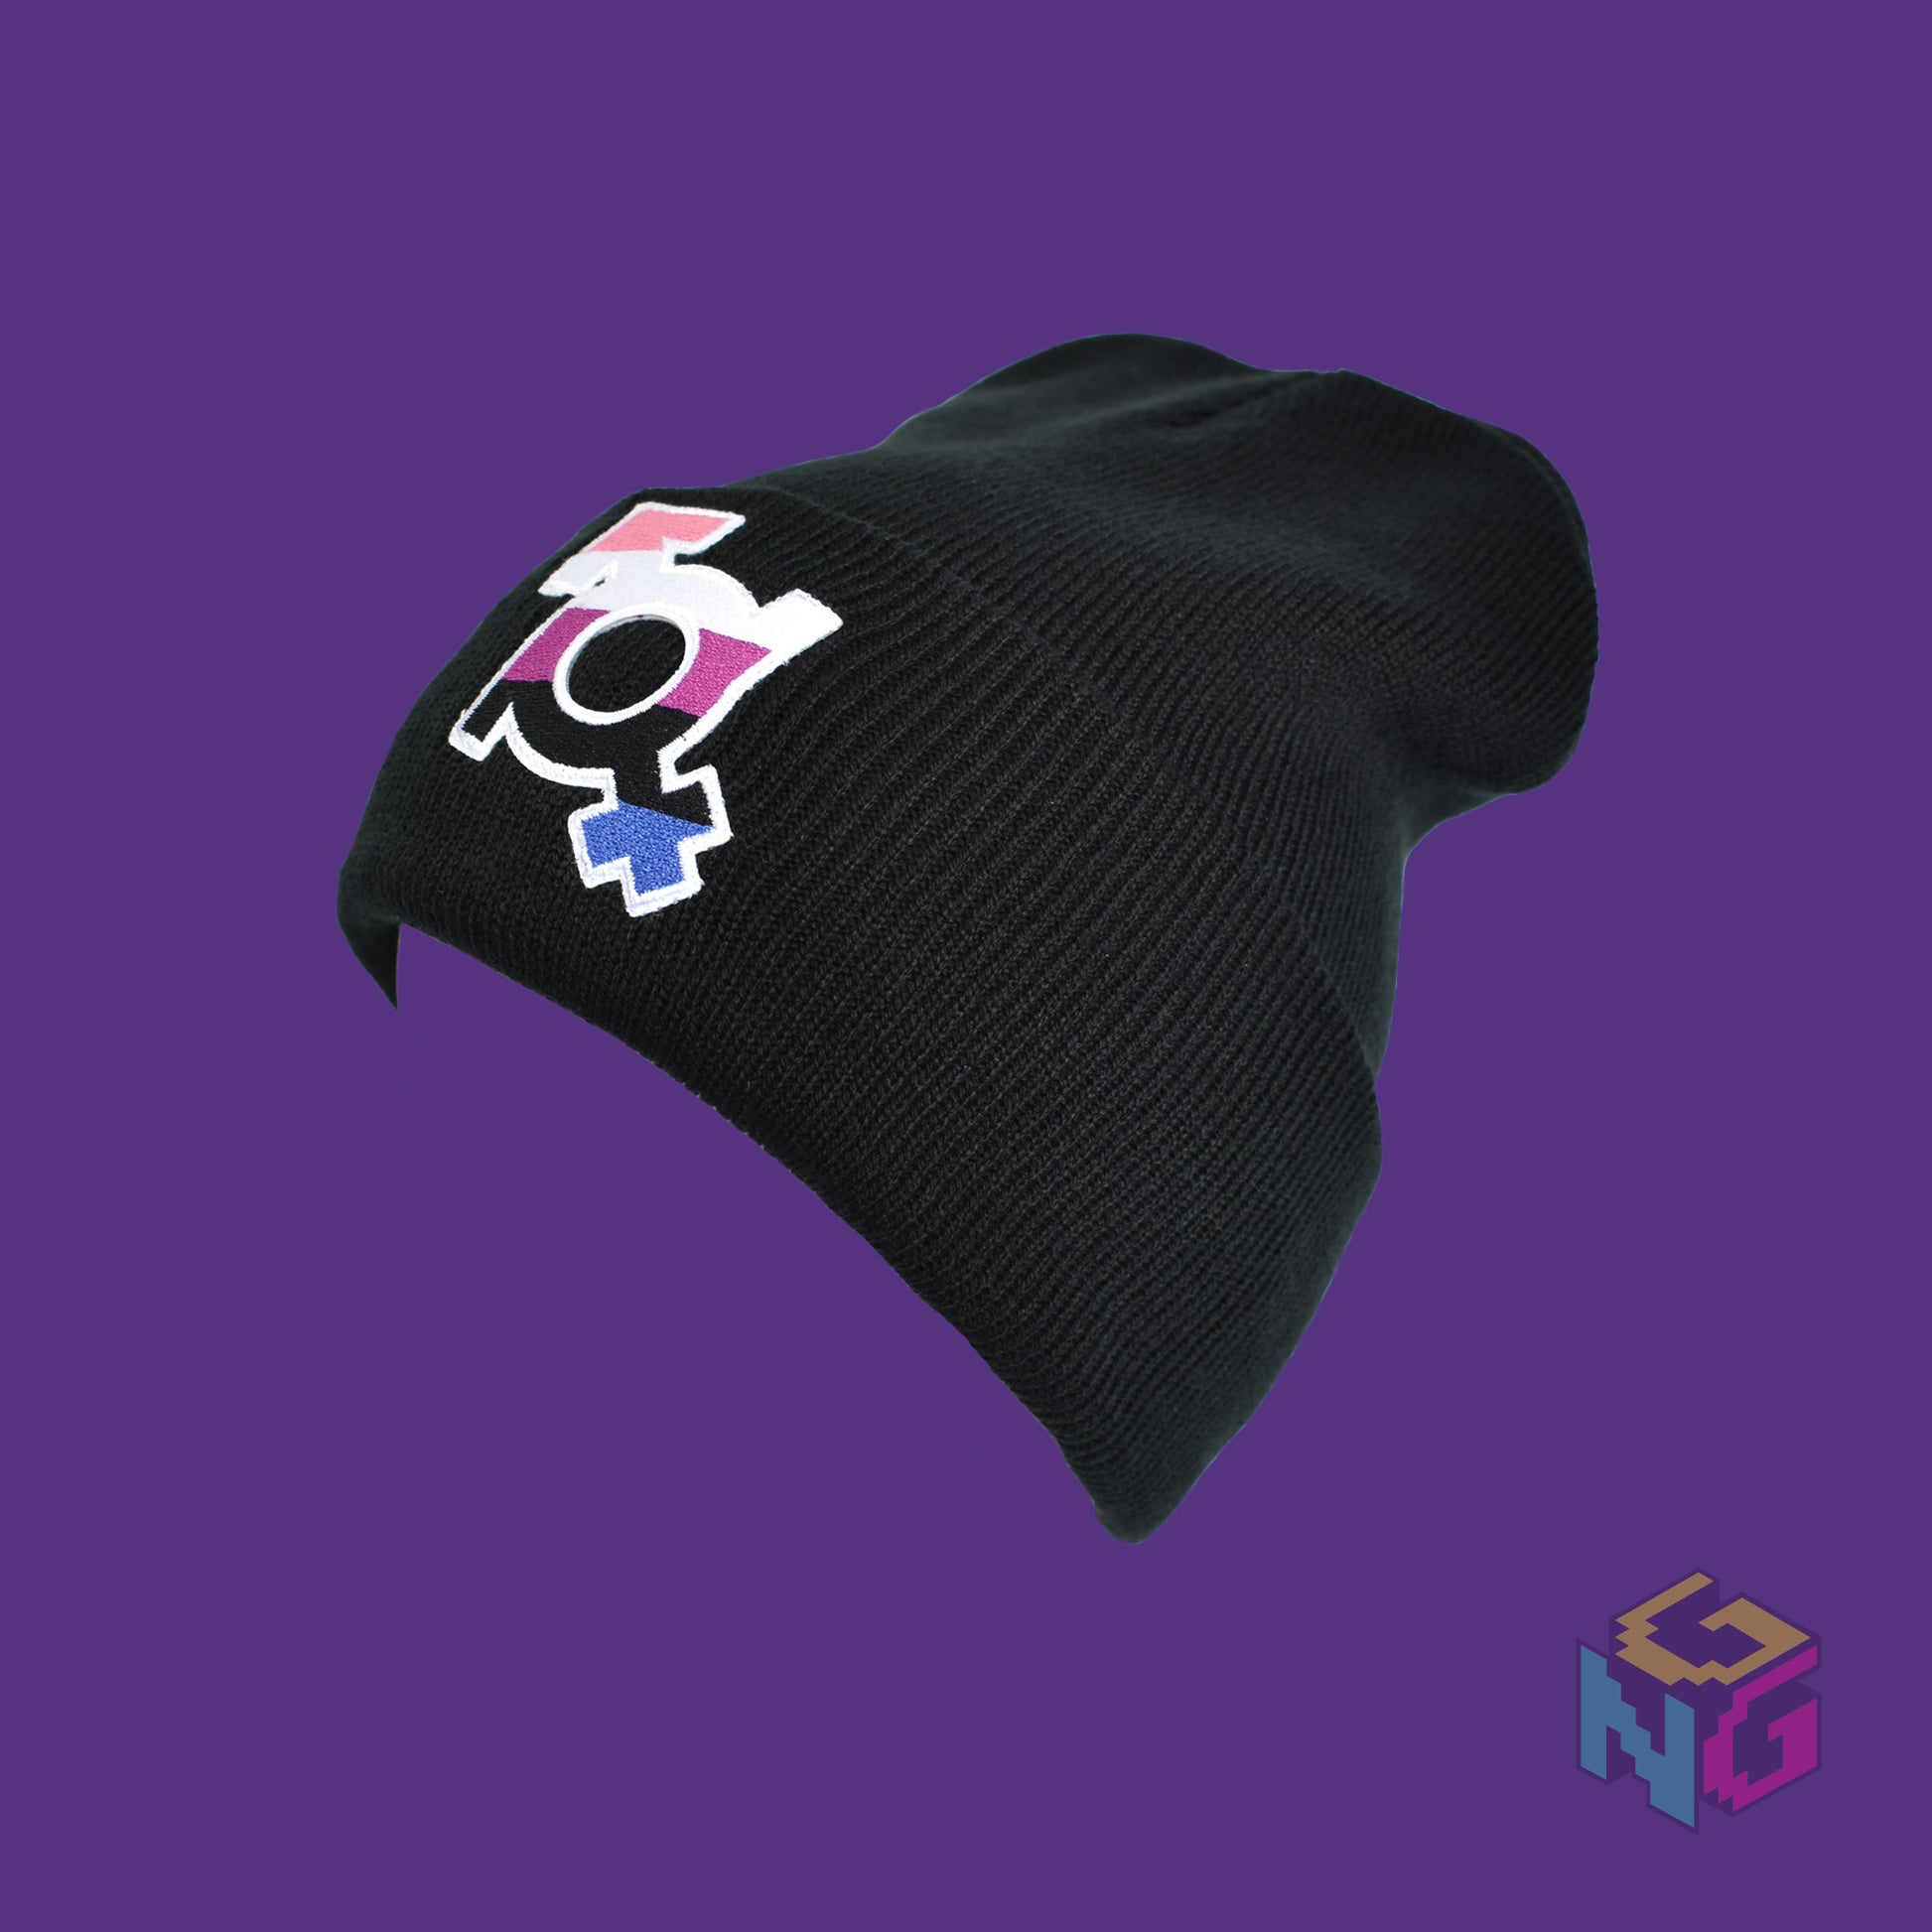 black genderfluid pride beanie stretched facing left in front of purple background